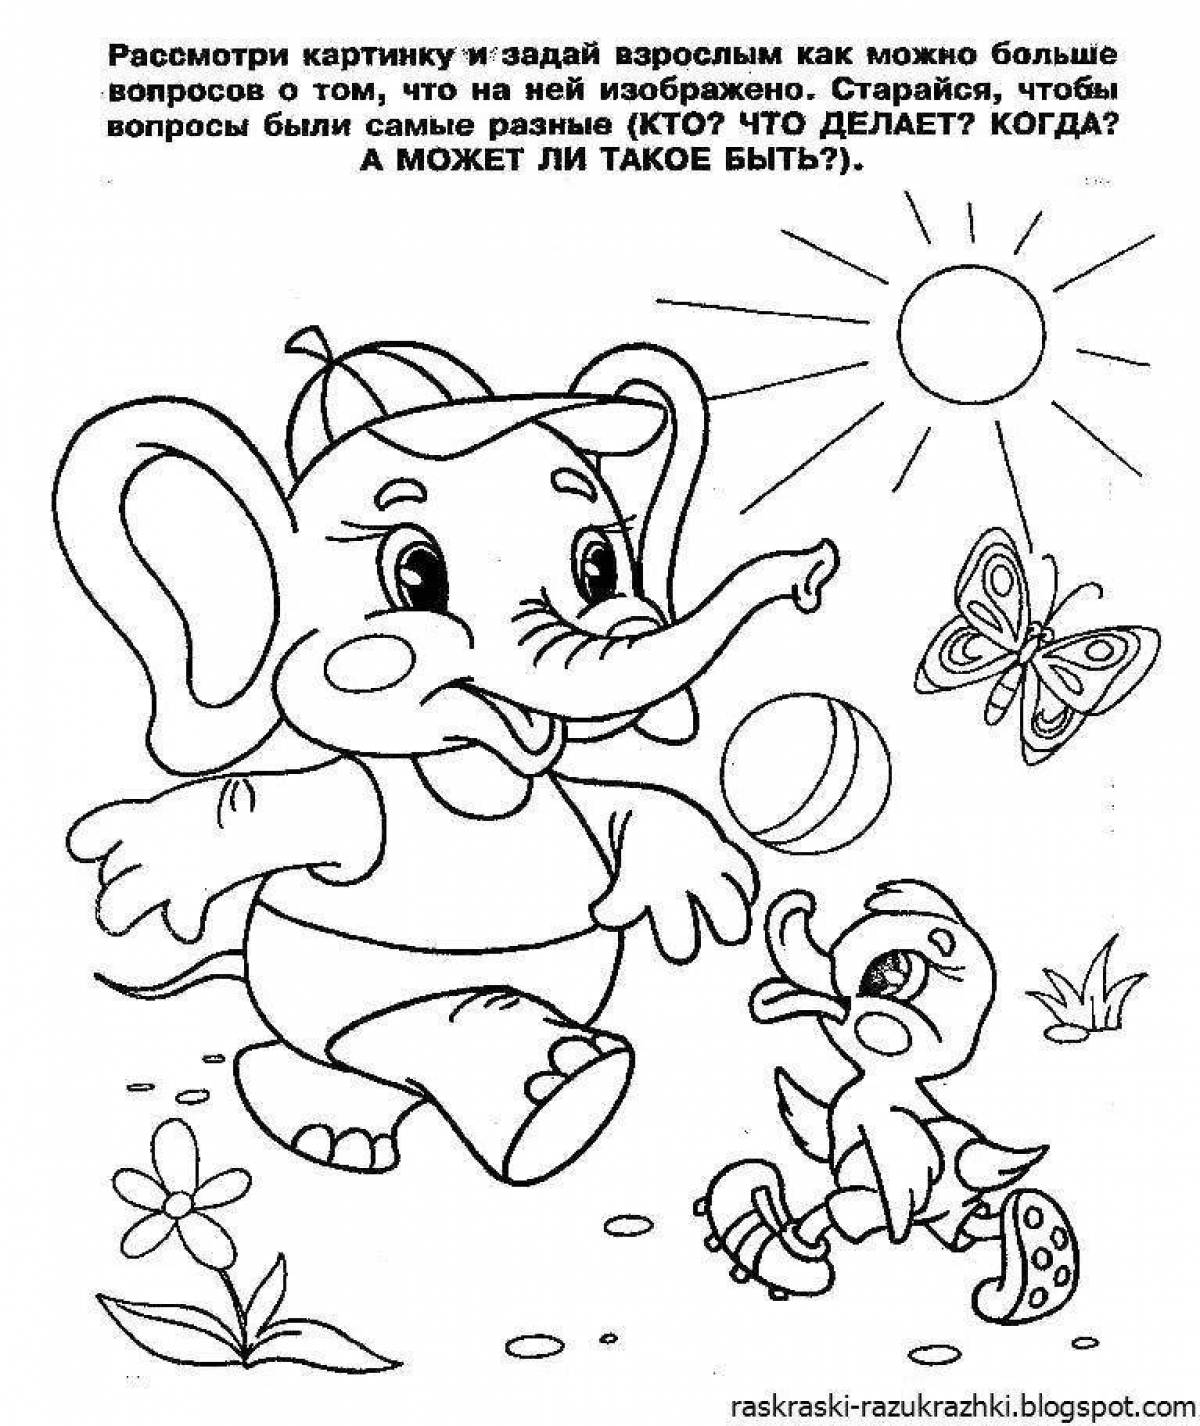 Creative coloring book for preschoolers 4-5 years old